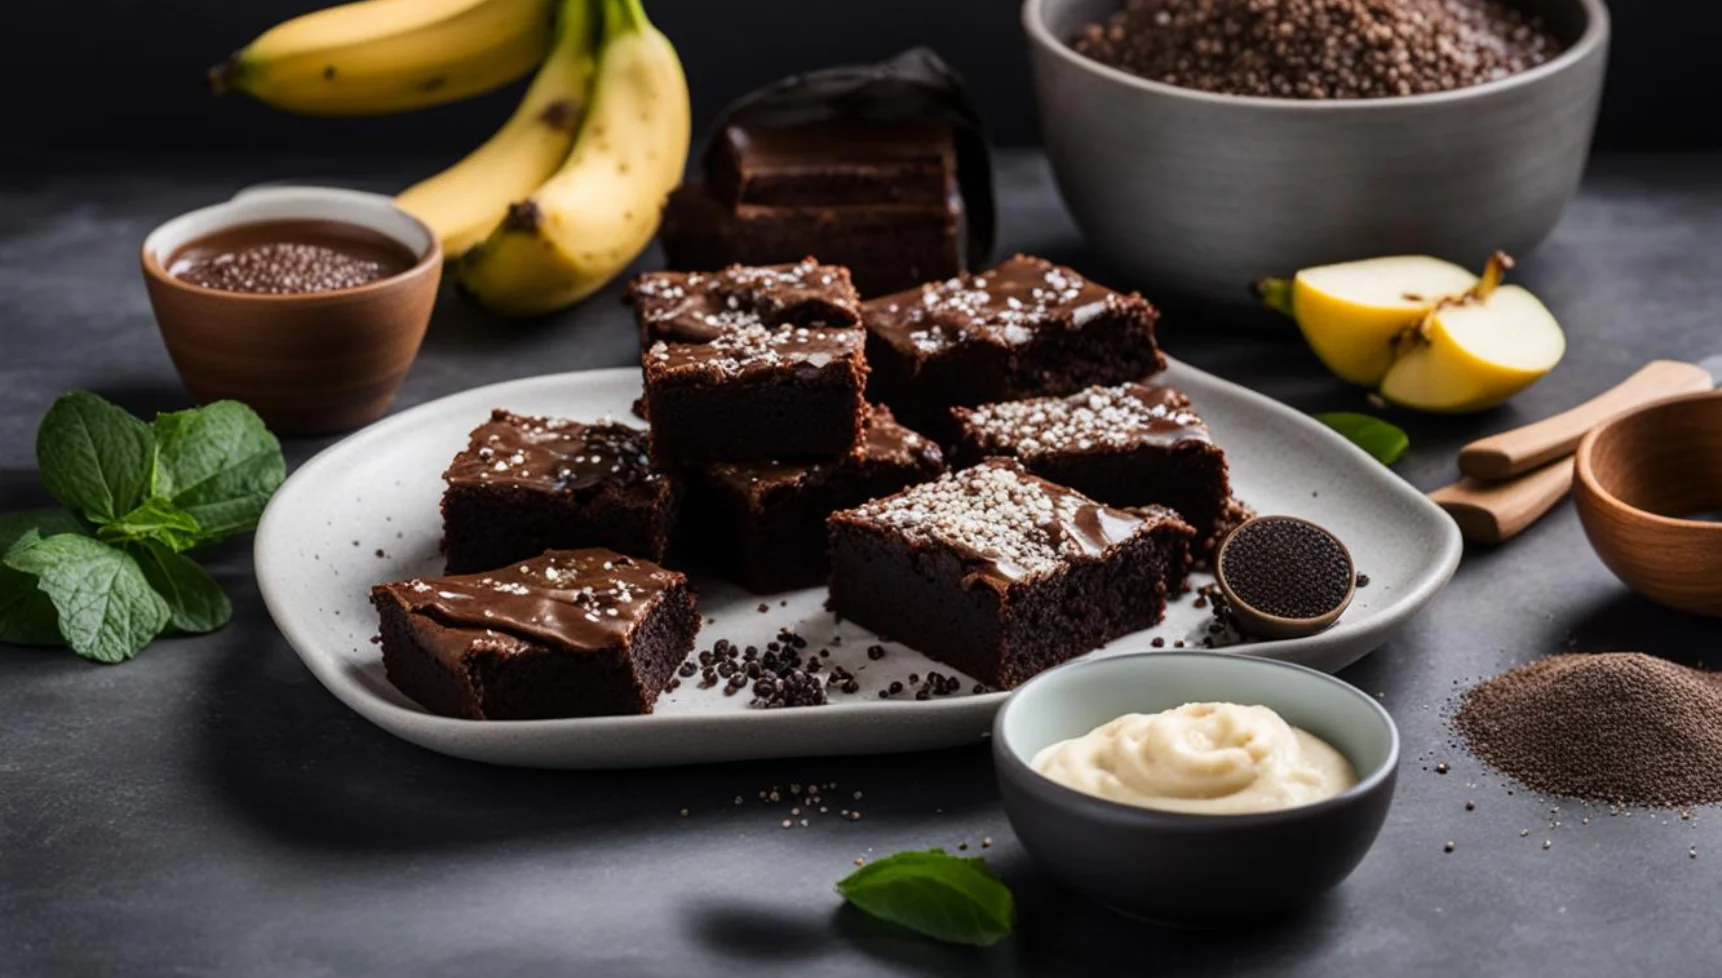 what can i replace eggs with in brownies